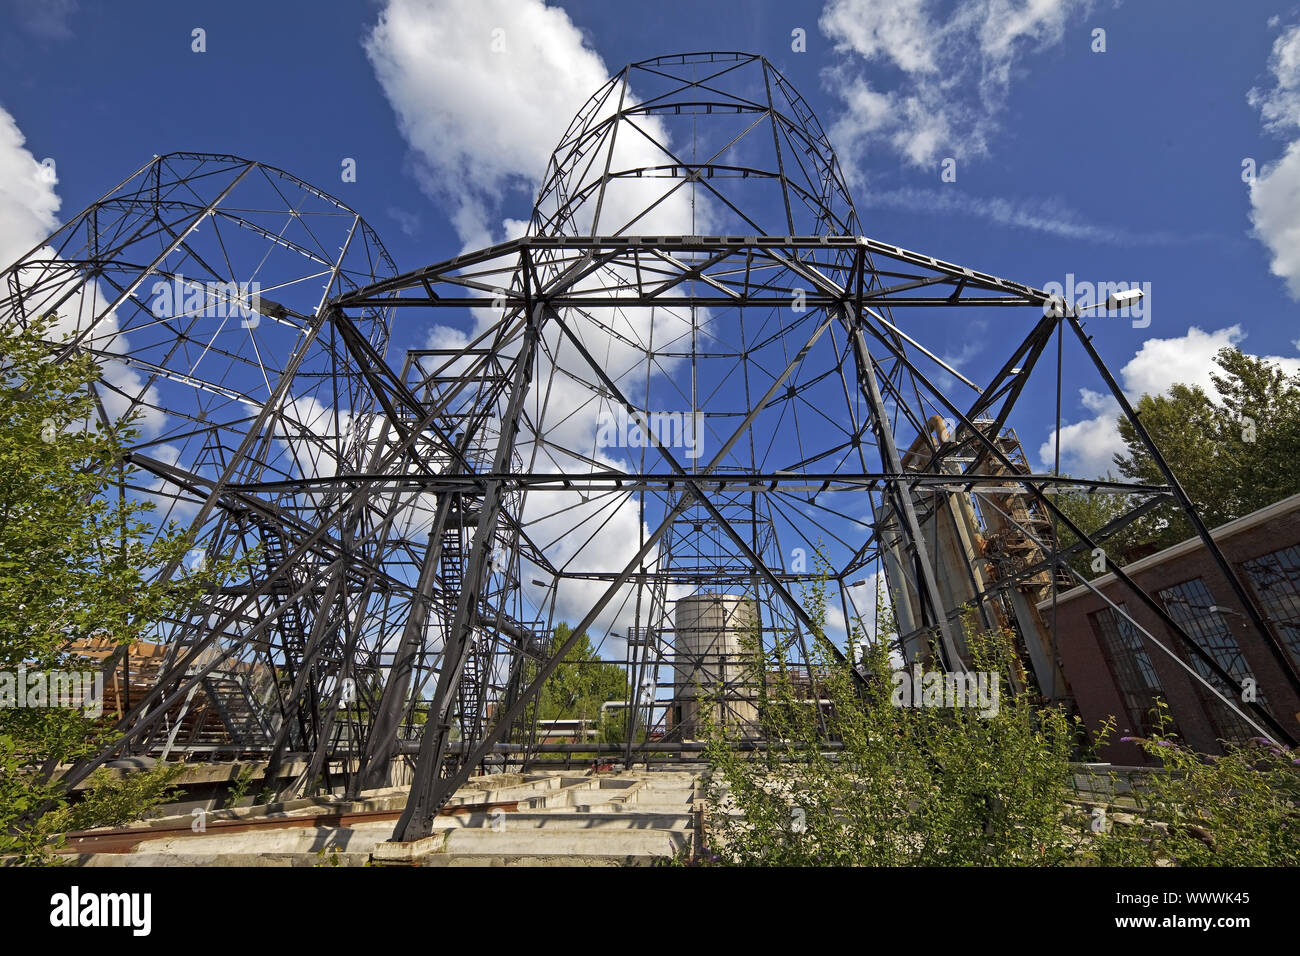 remains of former coking plant Hansa, Dortmund, Ruhr Area, Germany, Europe Stock Photo